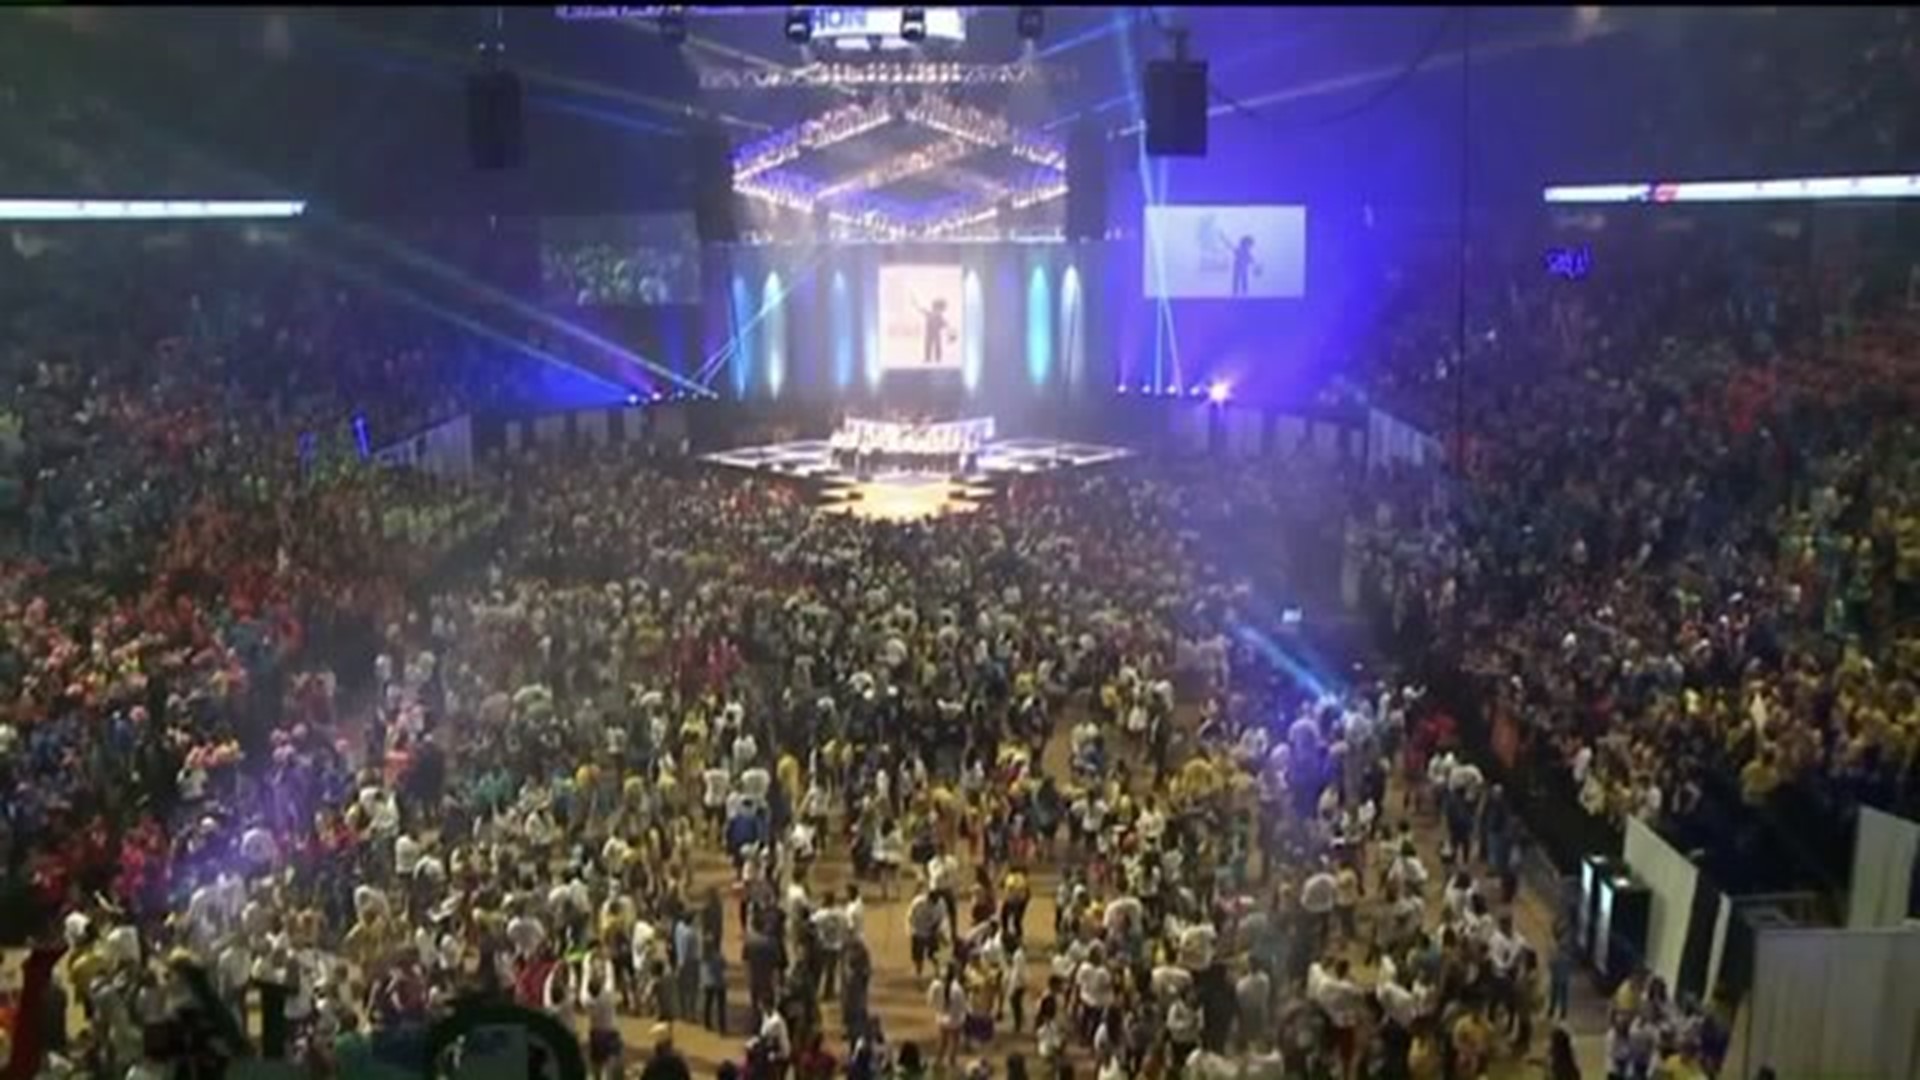 Penn State Ticket Sales Will Help THON